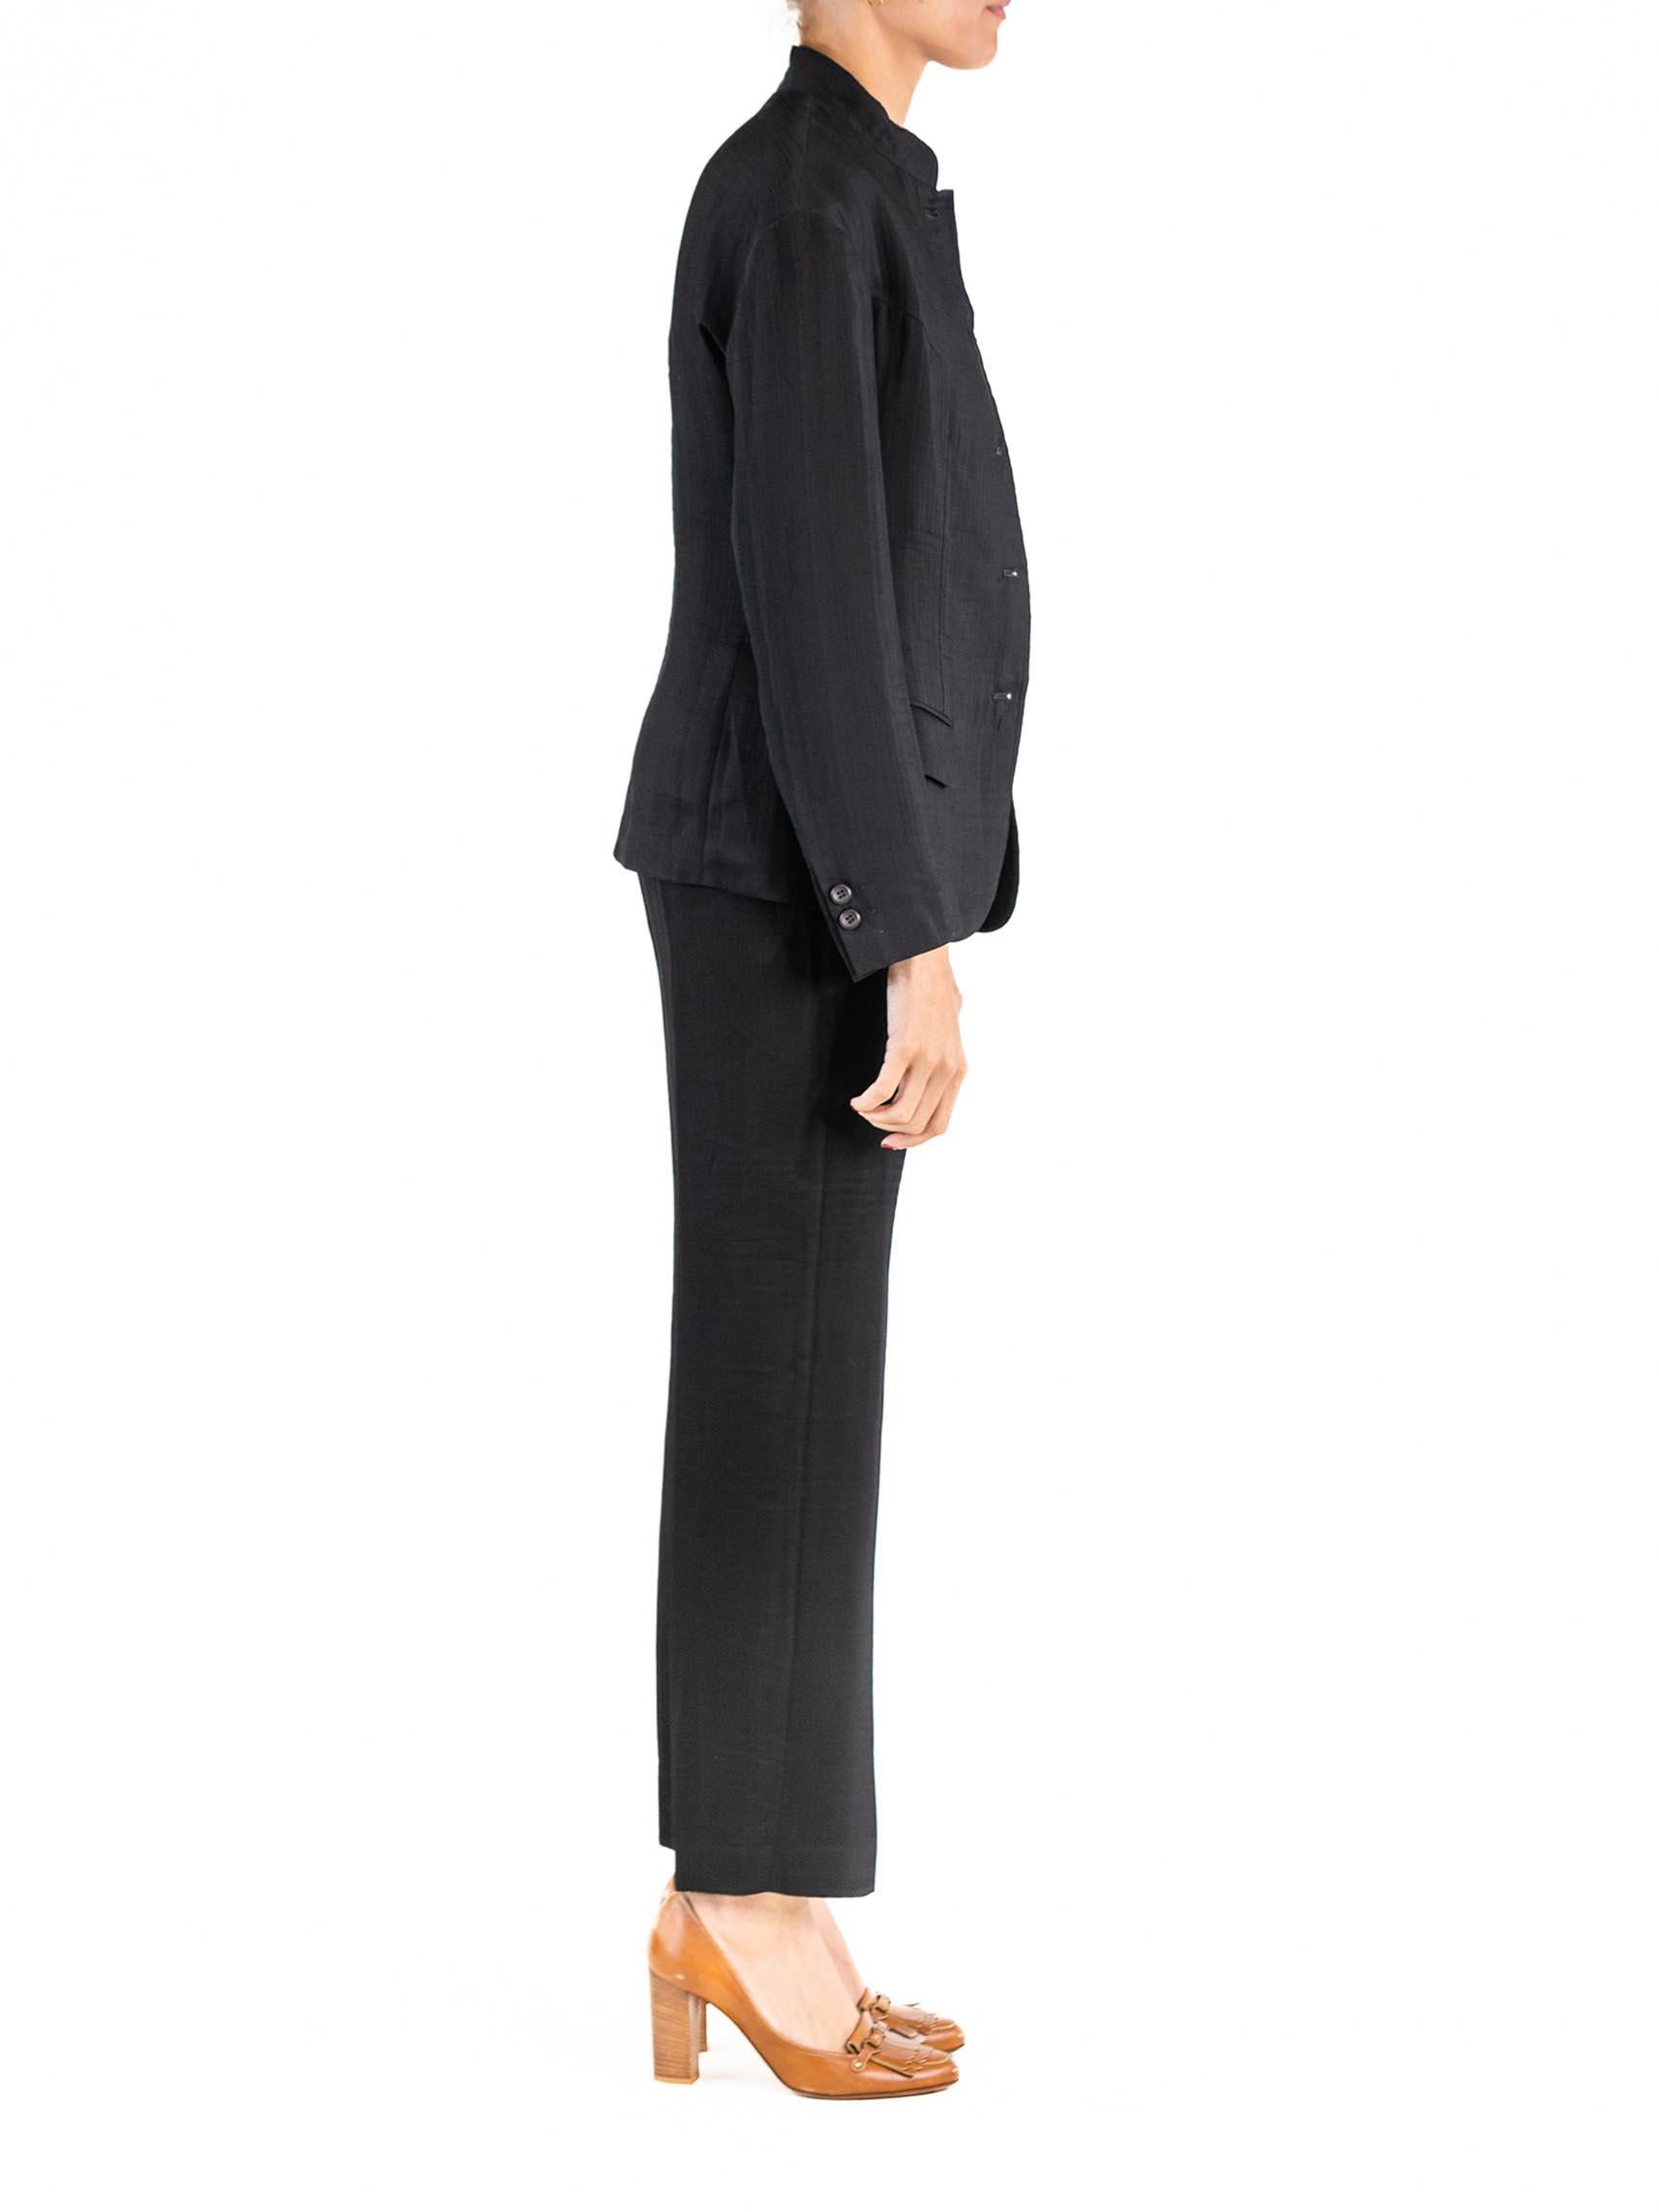 Women's 1990S ISSEY MIYAKE Black Rayon Blend Lightweight Pucker Double-Weave Pant Suit For Sale